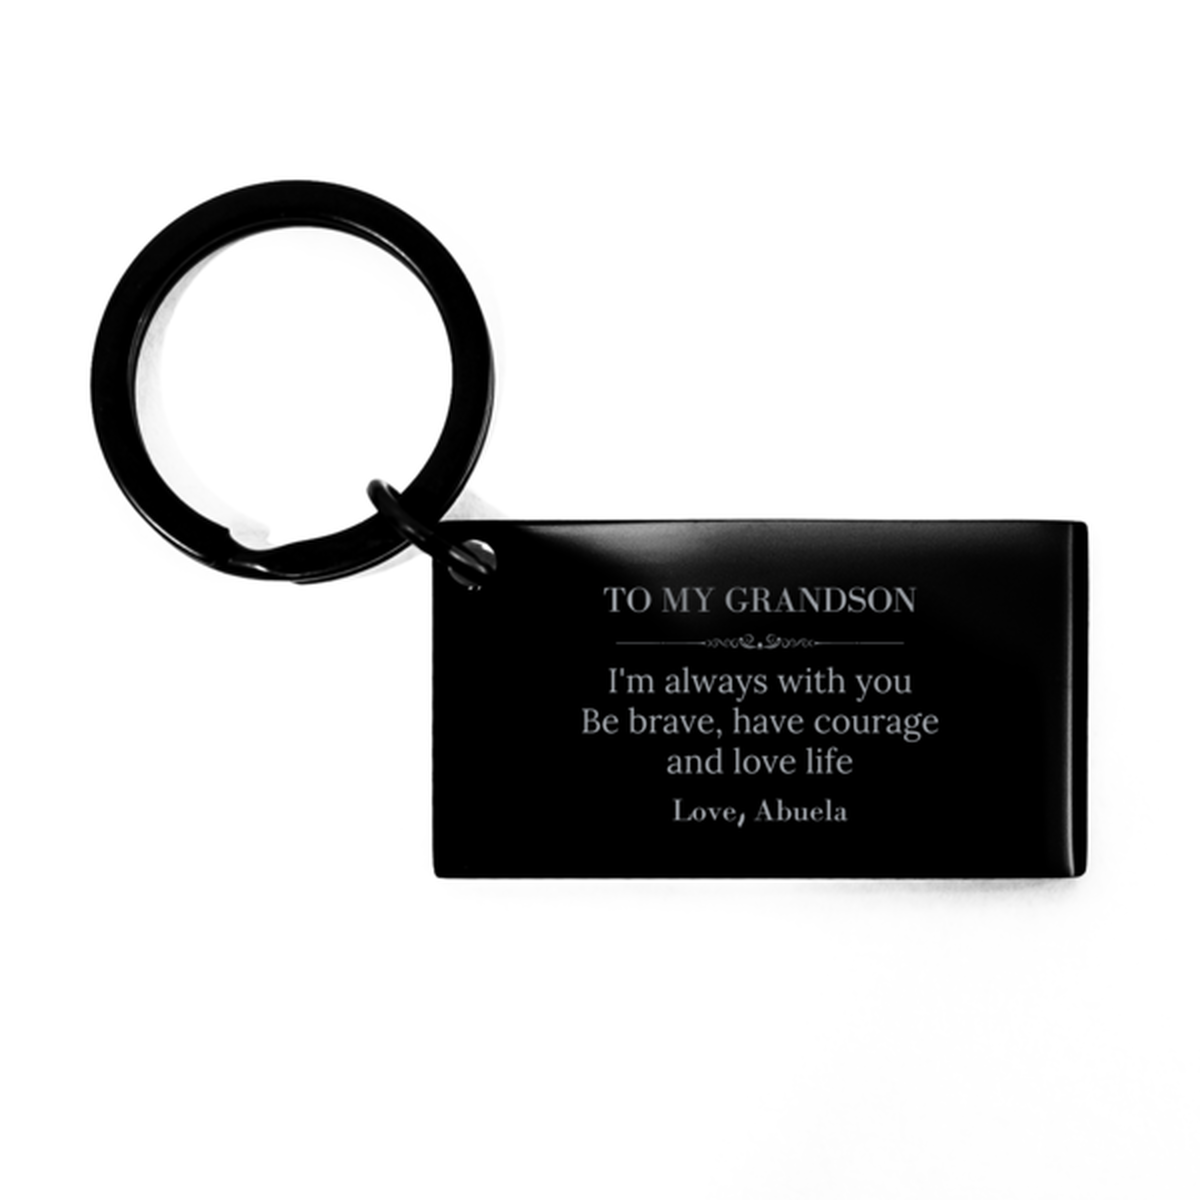 To My Grandson Gifts from Abuela, Unique Keychain Inspirational Christmas Birthday Graduation Gifts for Grandson I'm always with you. Be brave, have courage and love life. Love, Abuela